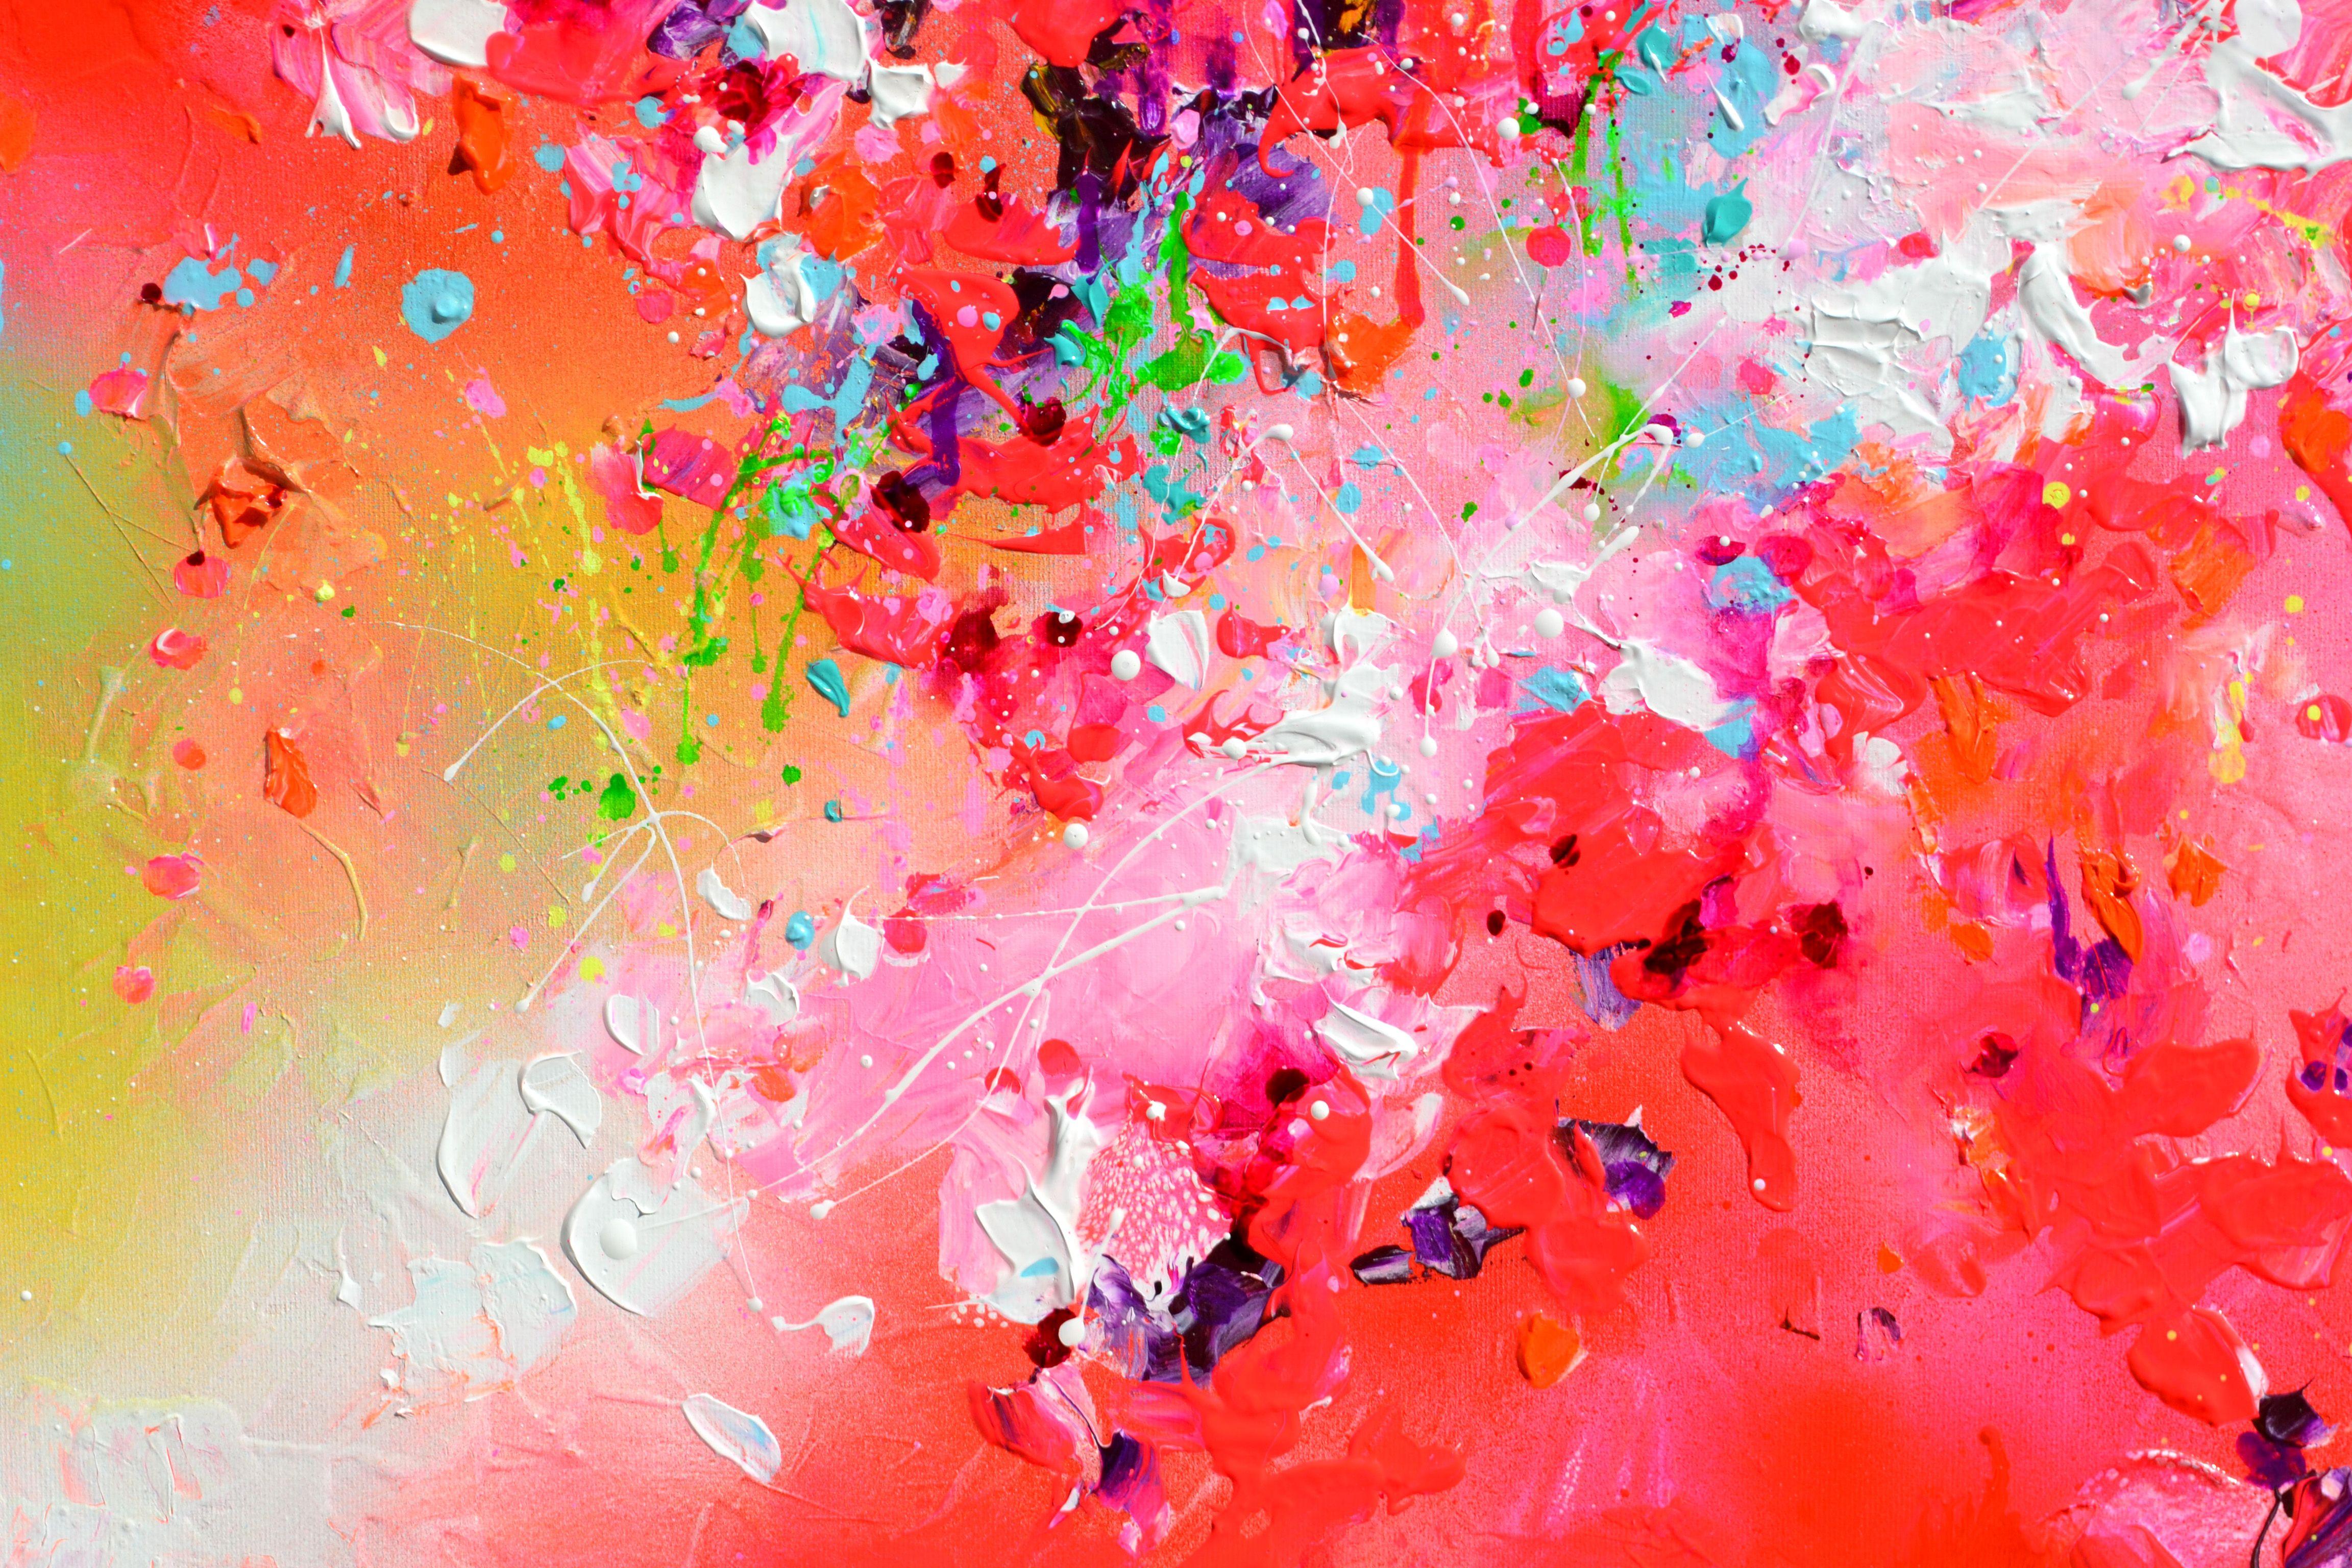 Fresh Moods 59, Painting, Acrylic on Canvas - Pink Abstract Painting by Soos Roxana Gabriela